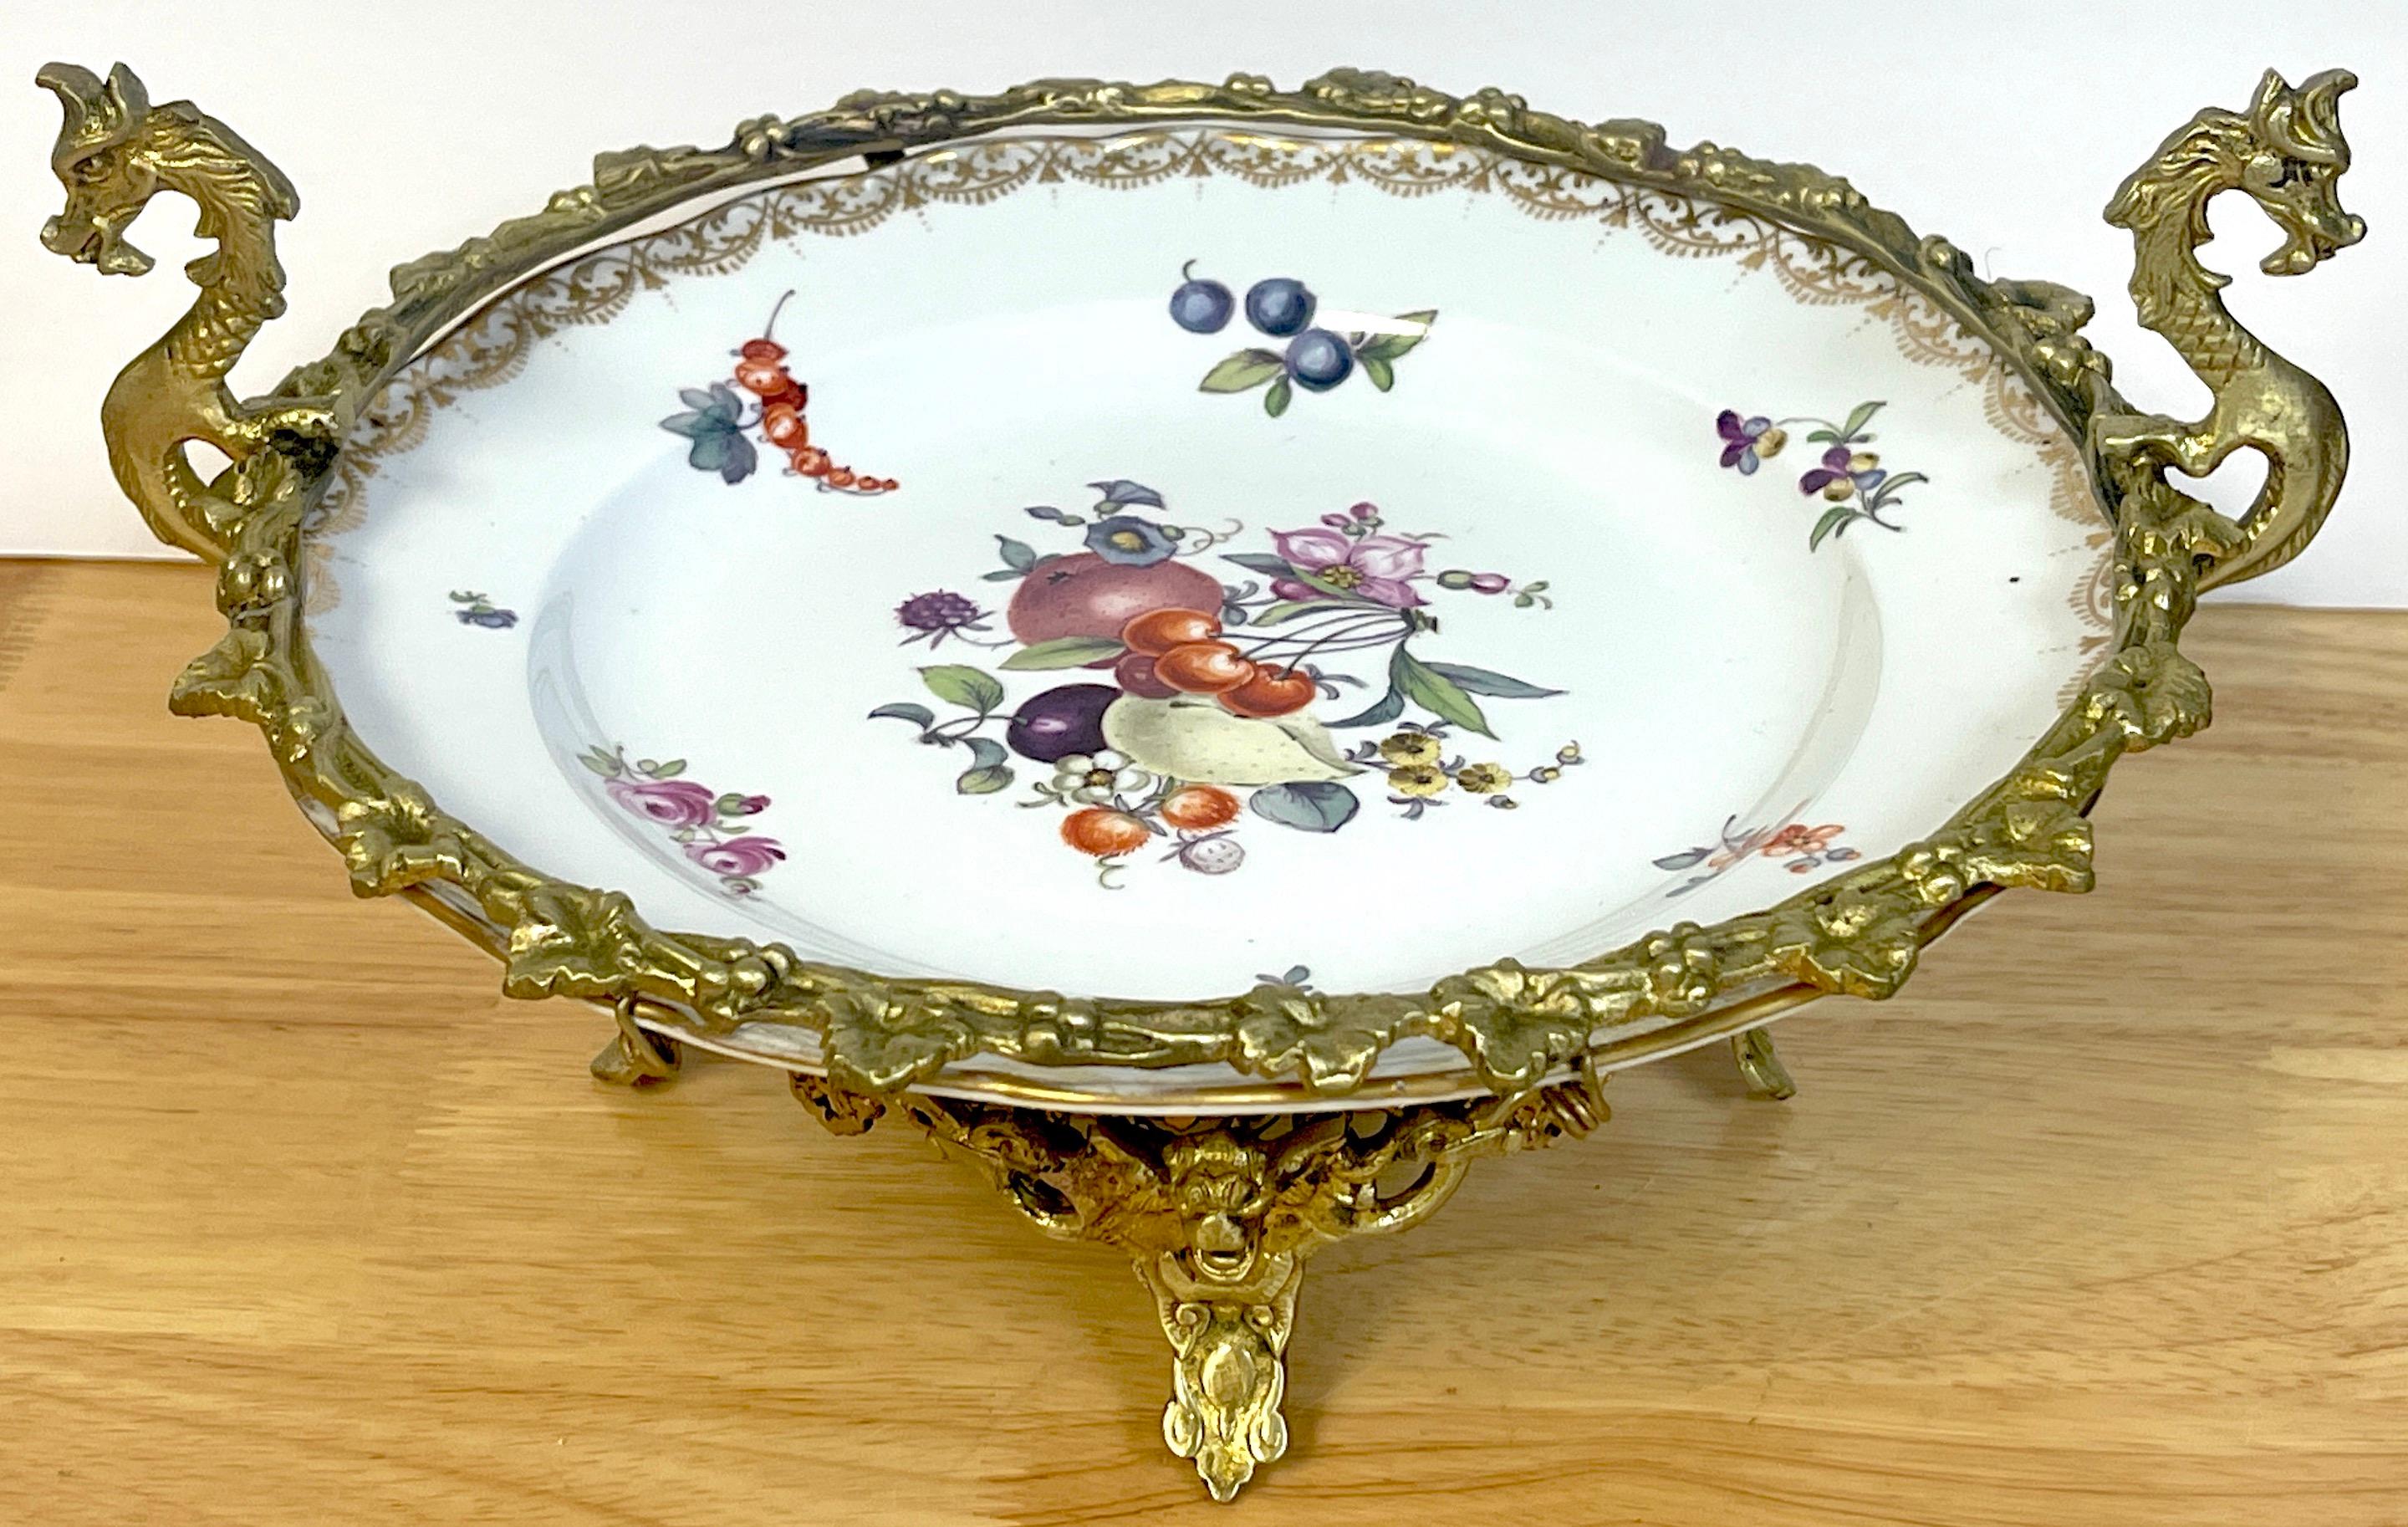 Hand-Painted 19th C Meissen Fruit & Flower Motif Ormolu Mounted Tazza For Sale